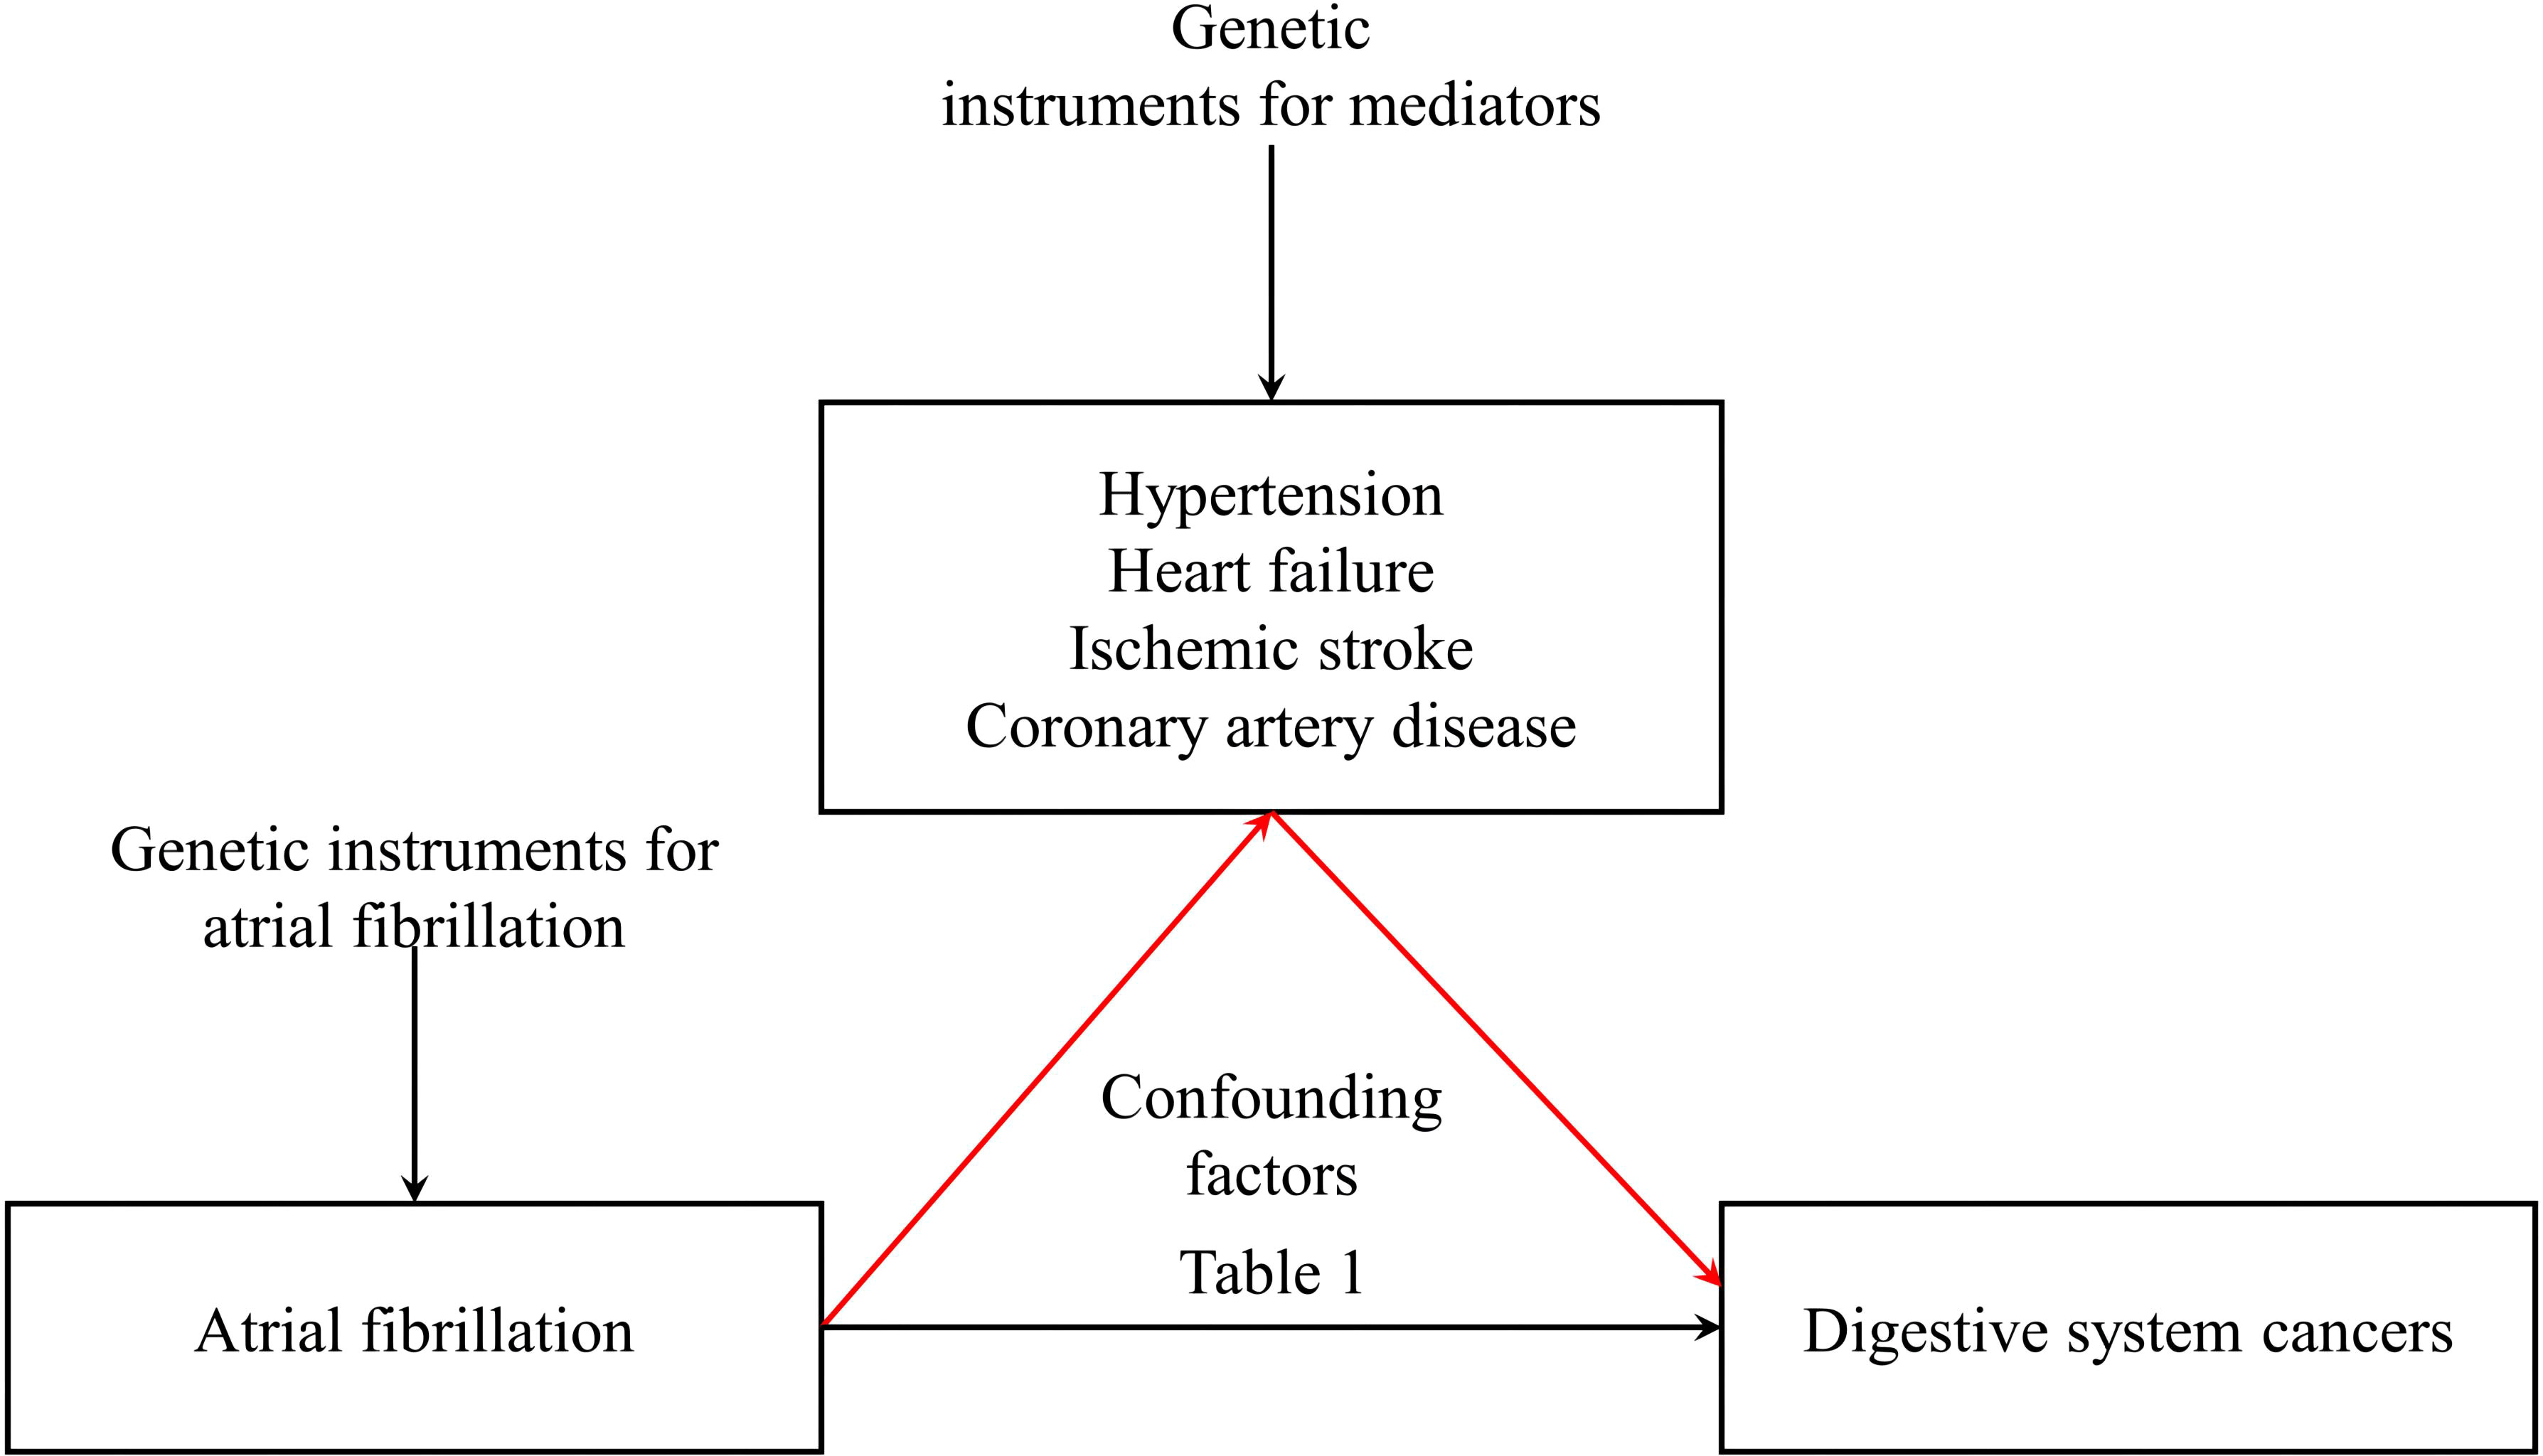 Frontiers | Connecting atrial fibrillation to digestive neoplasms:  exploring mediation via ischemic stroke and heart failure in Mendelian  randomization studies